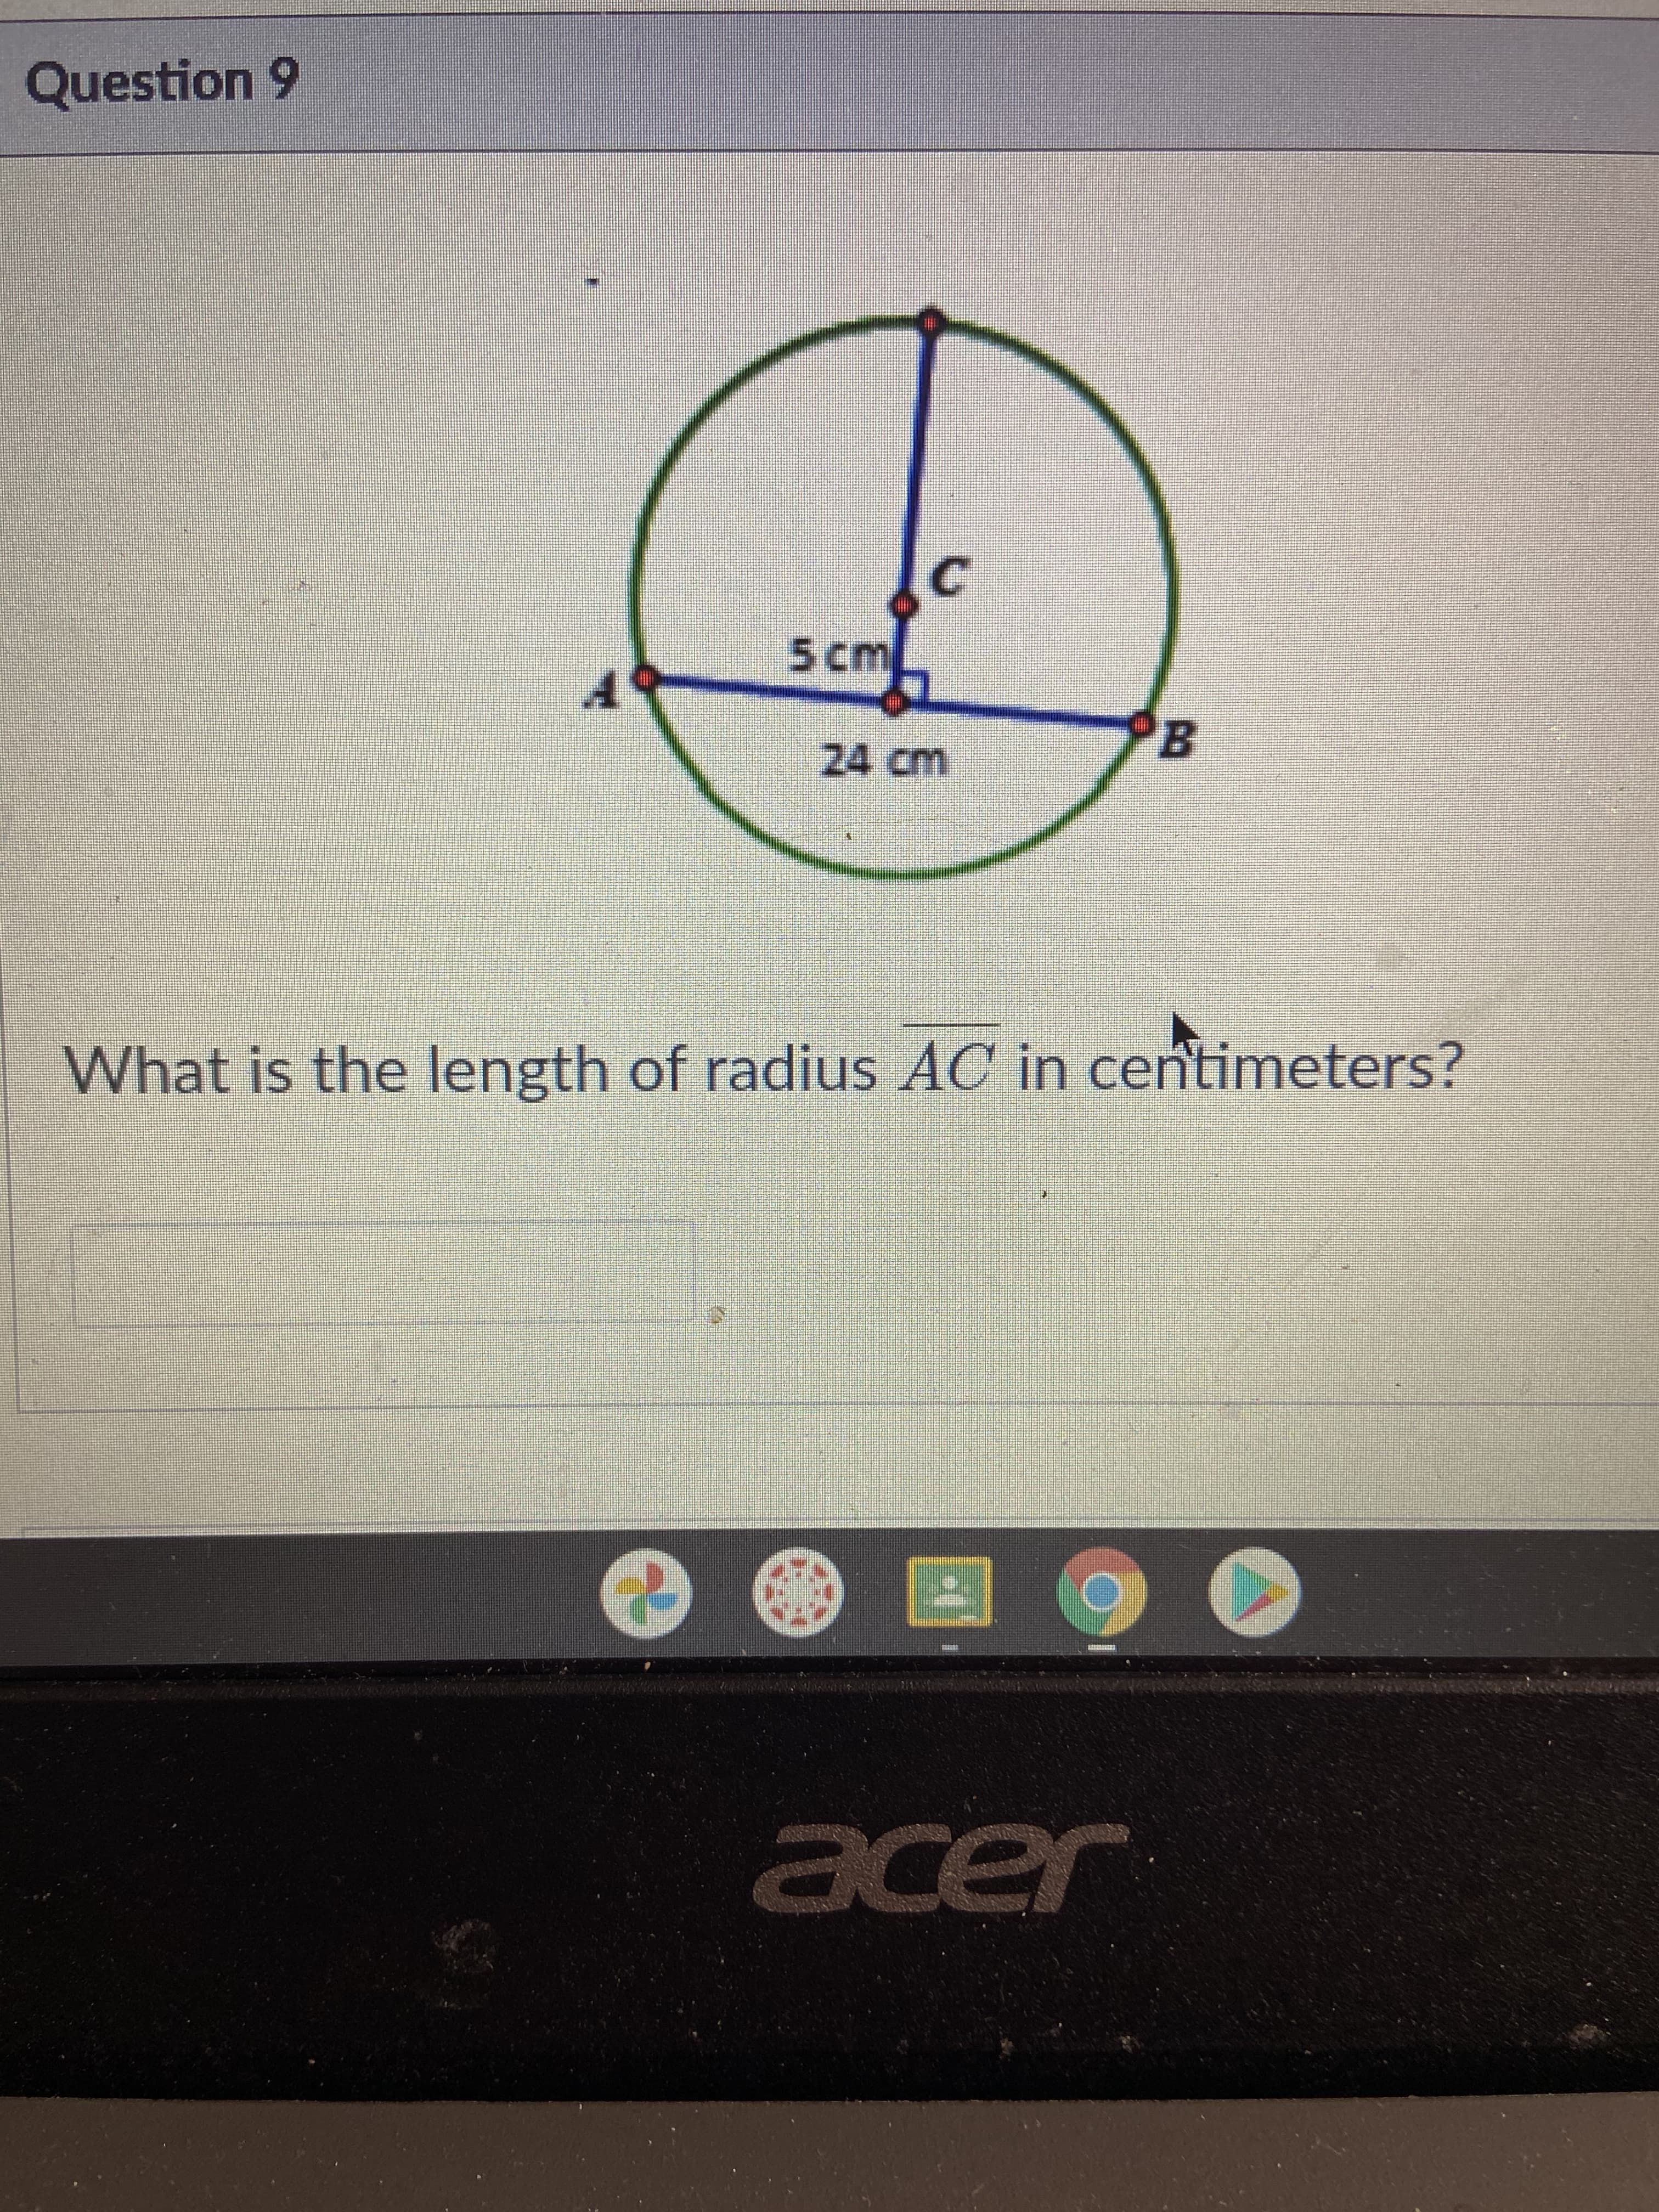 What is the length of radius AC in centimeters?
